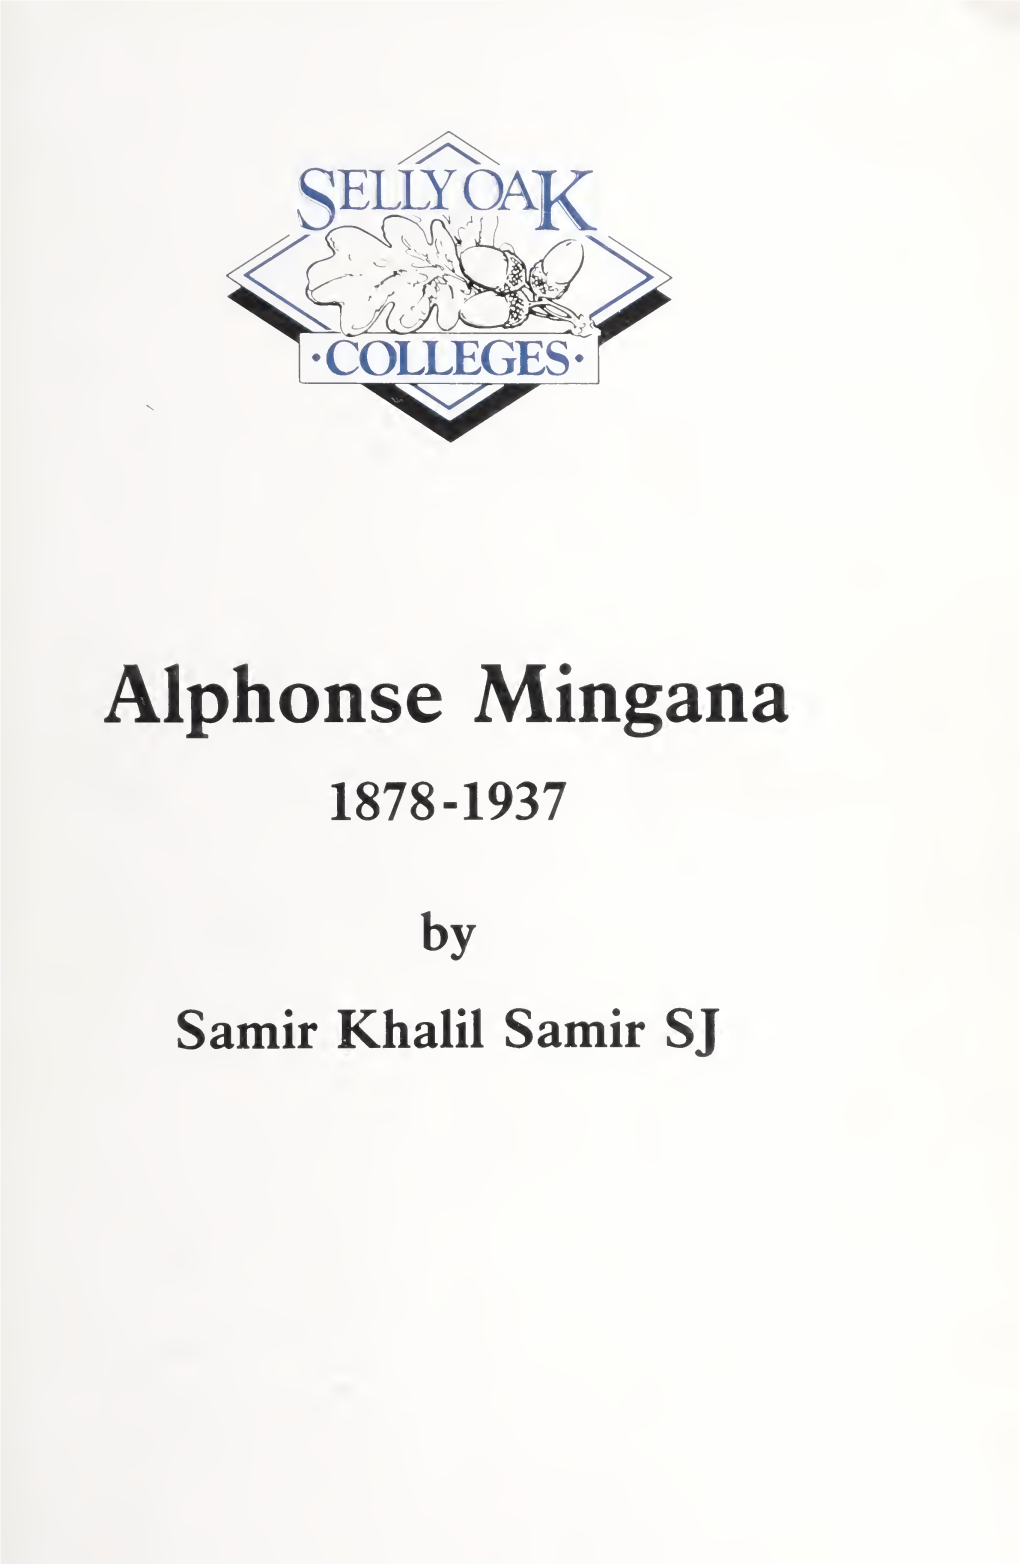 Alphonse Mingana (1878-1937) and His Contribution to Early Christian-Muslim Studies